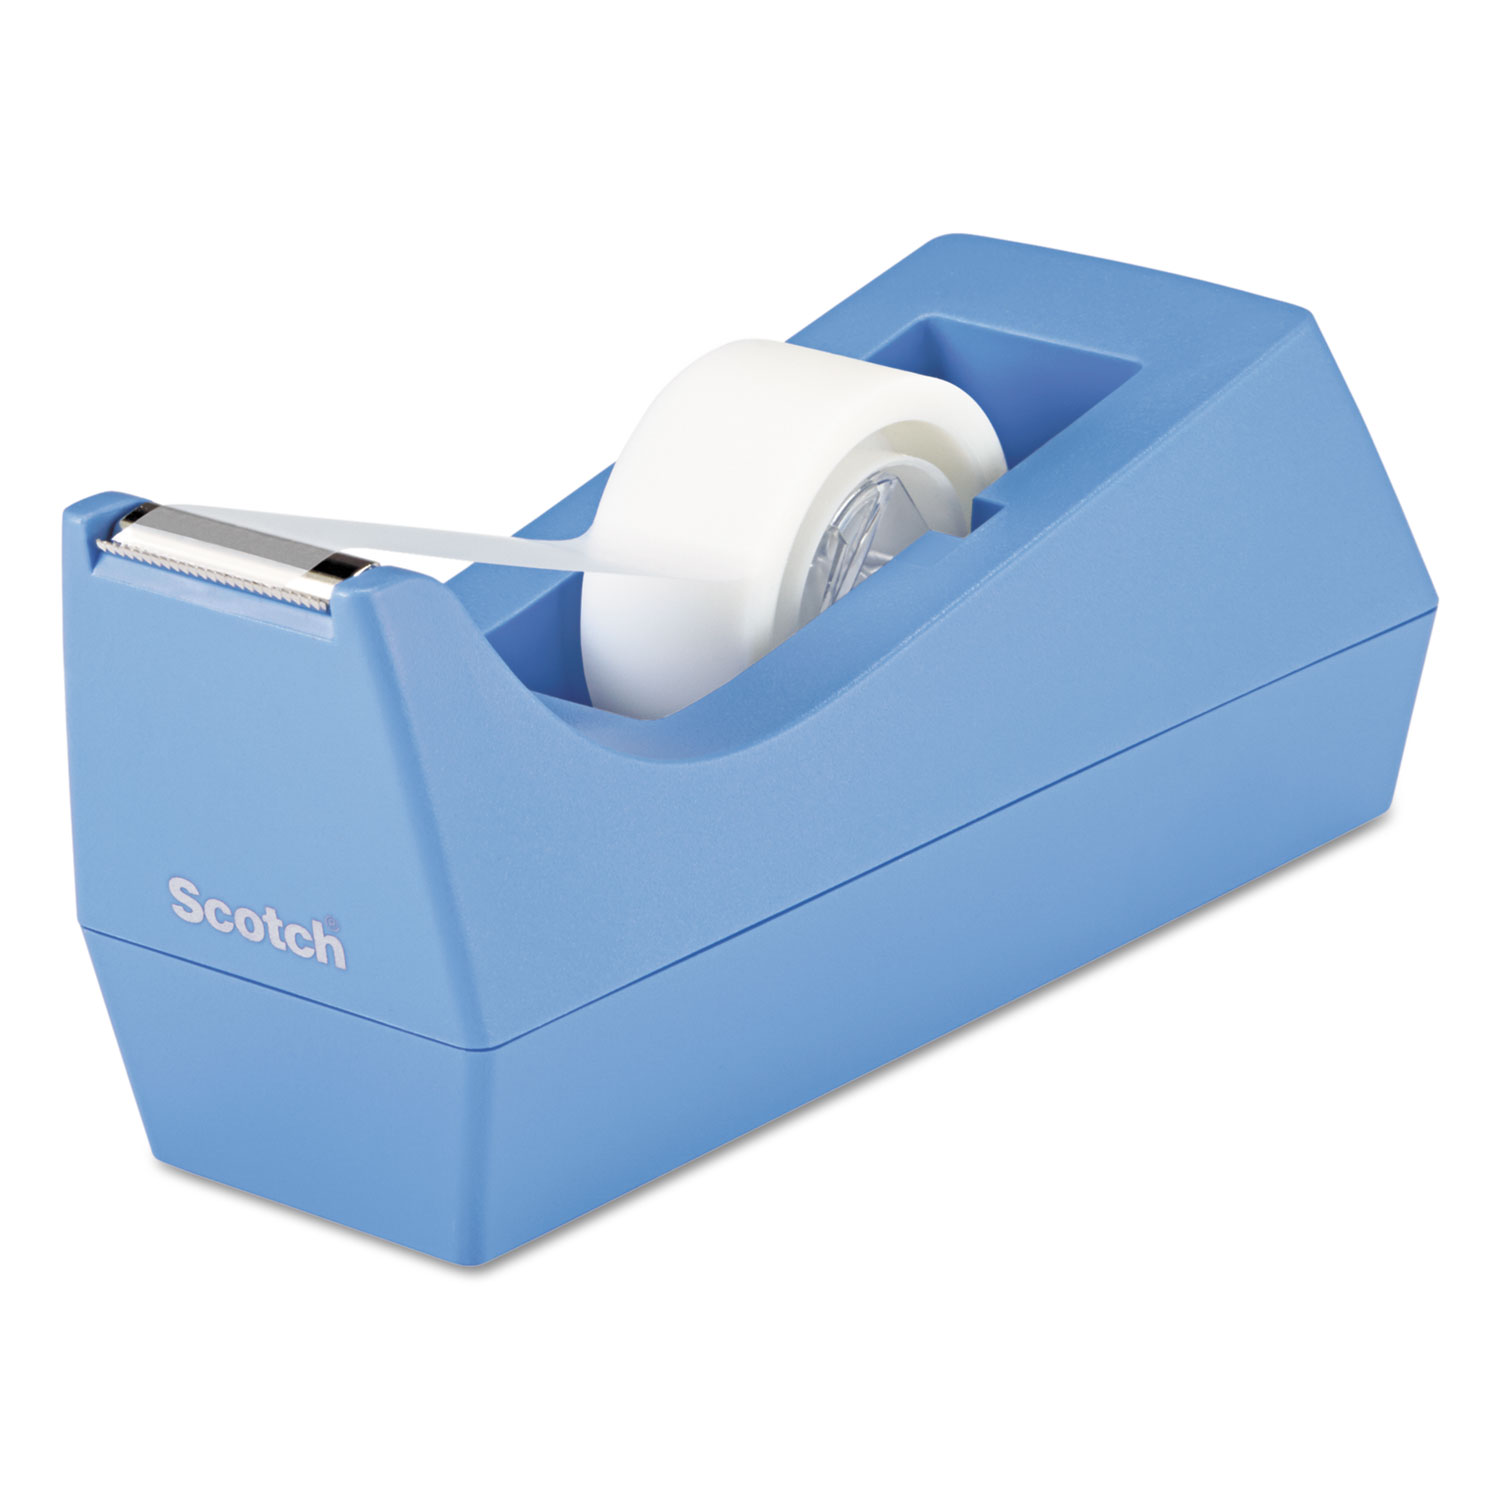 Desktop Tape Dispenser, 1 Core, Weighted Non-Skid Base, Periwinkle